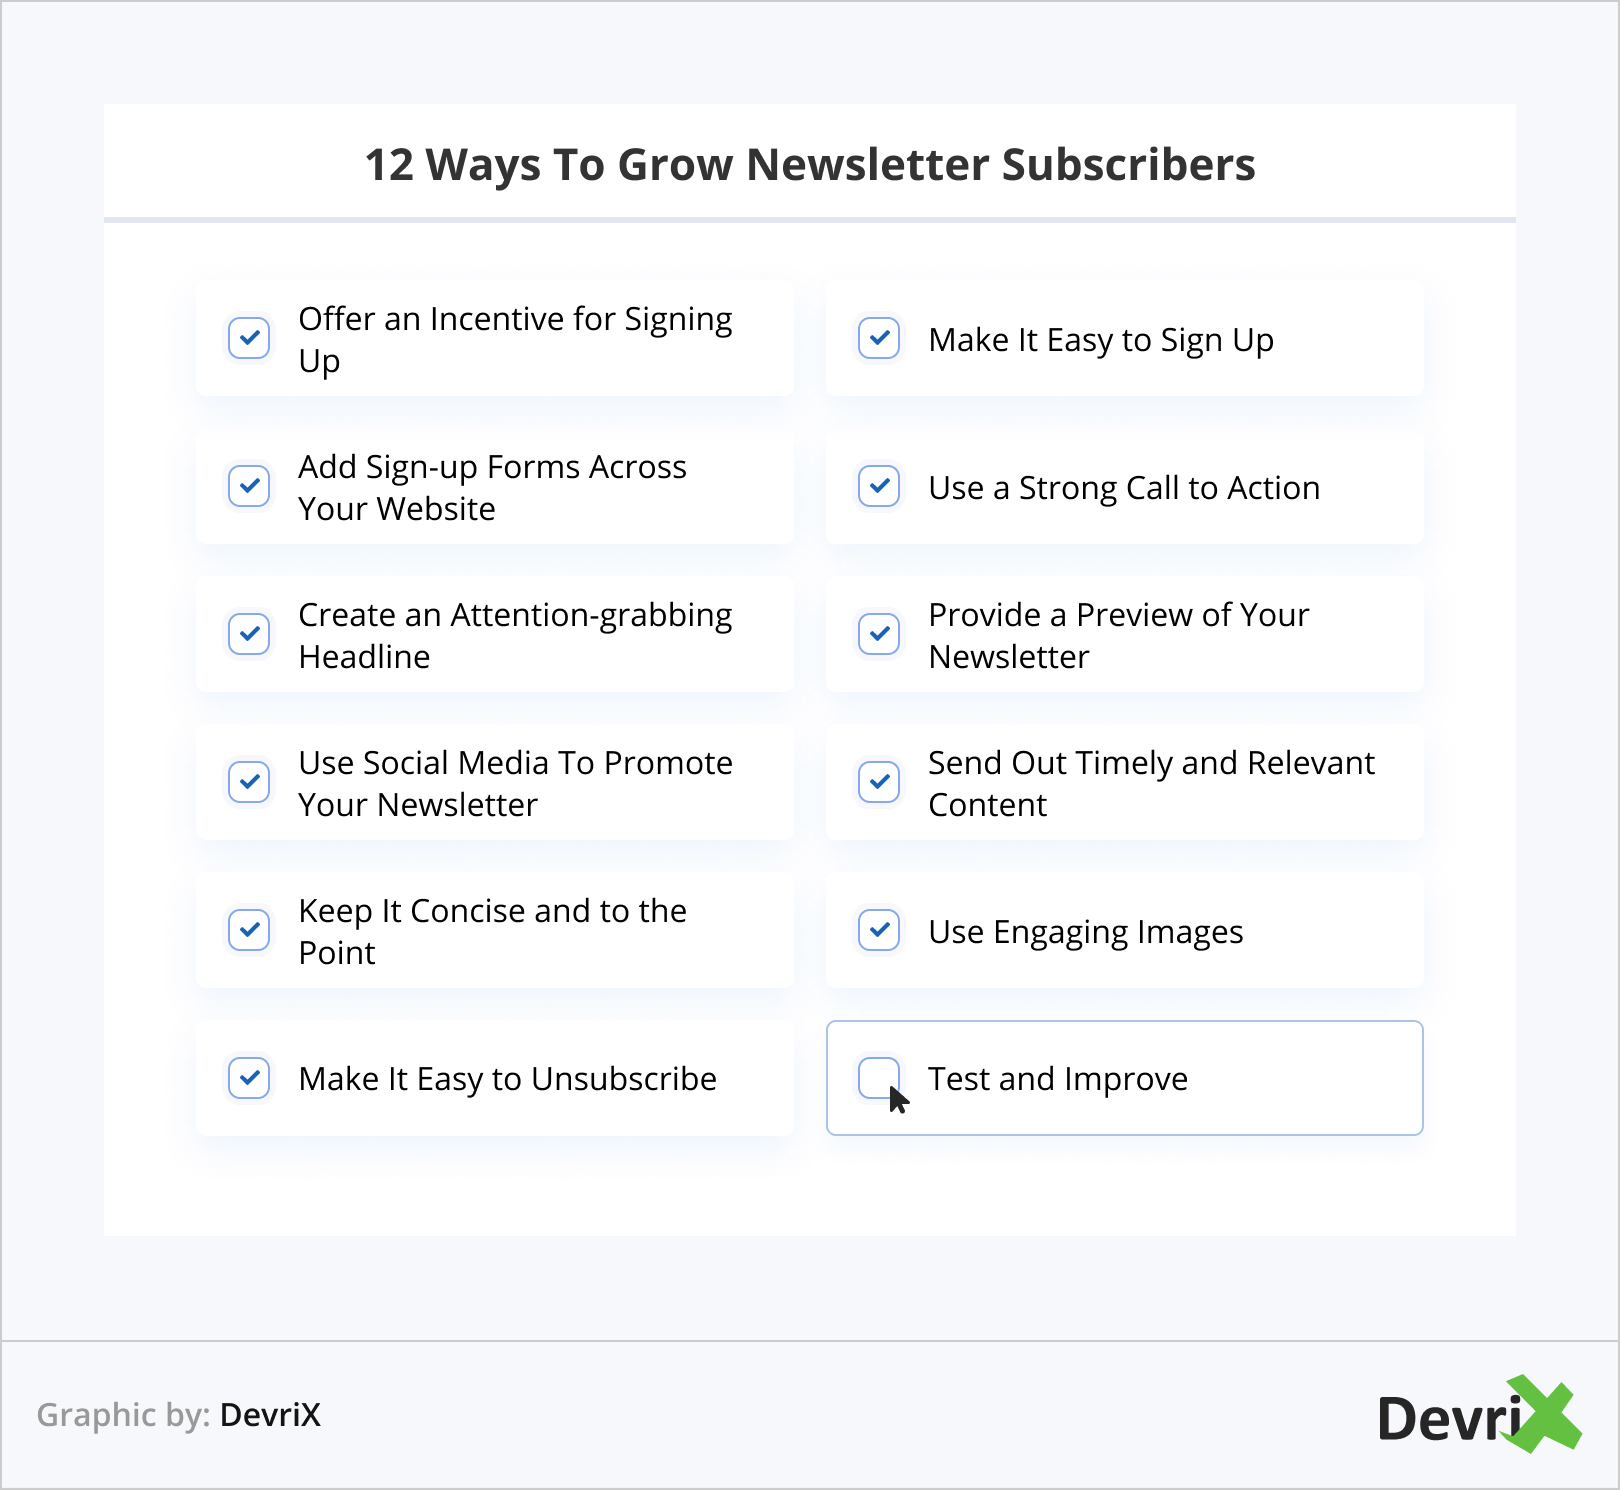 12 Ways To Grow Newsletter Subscribers